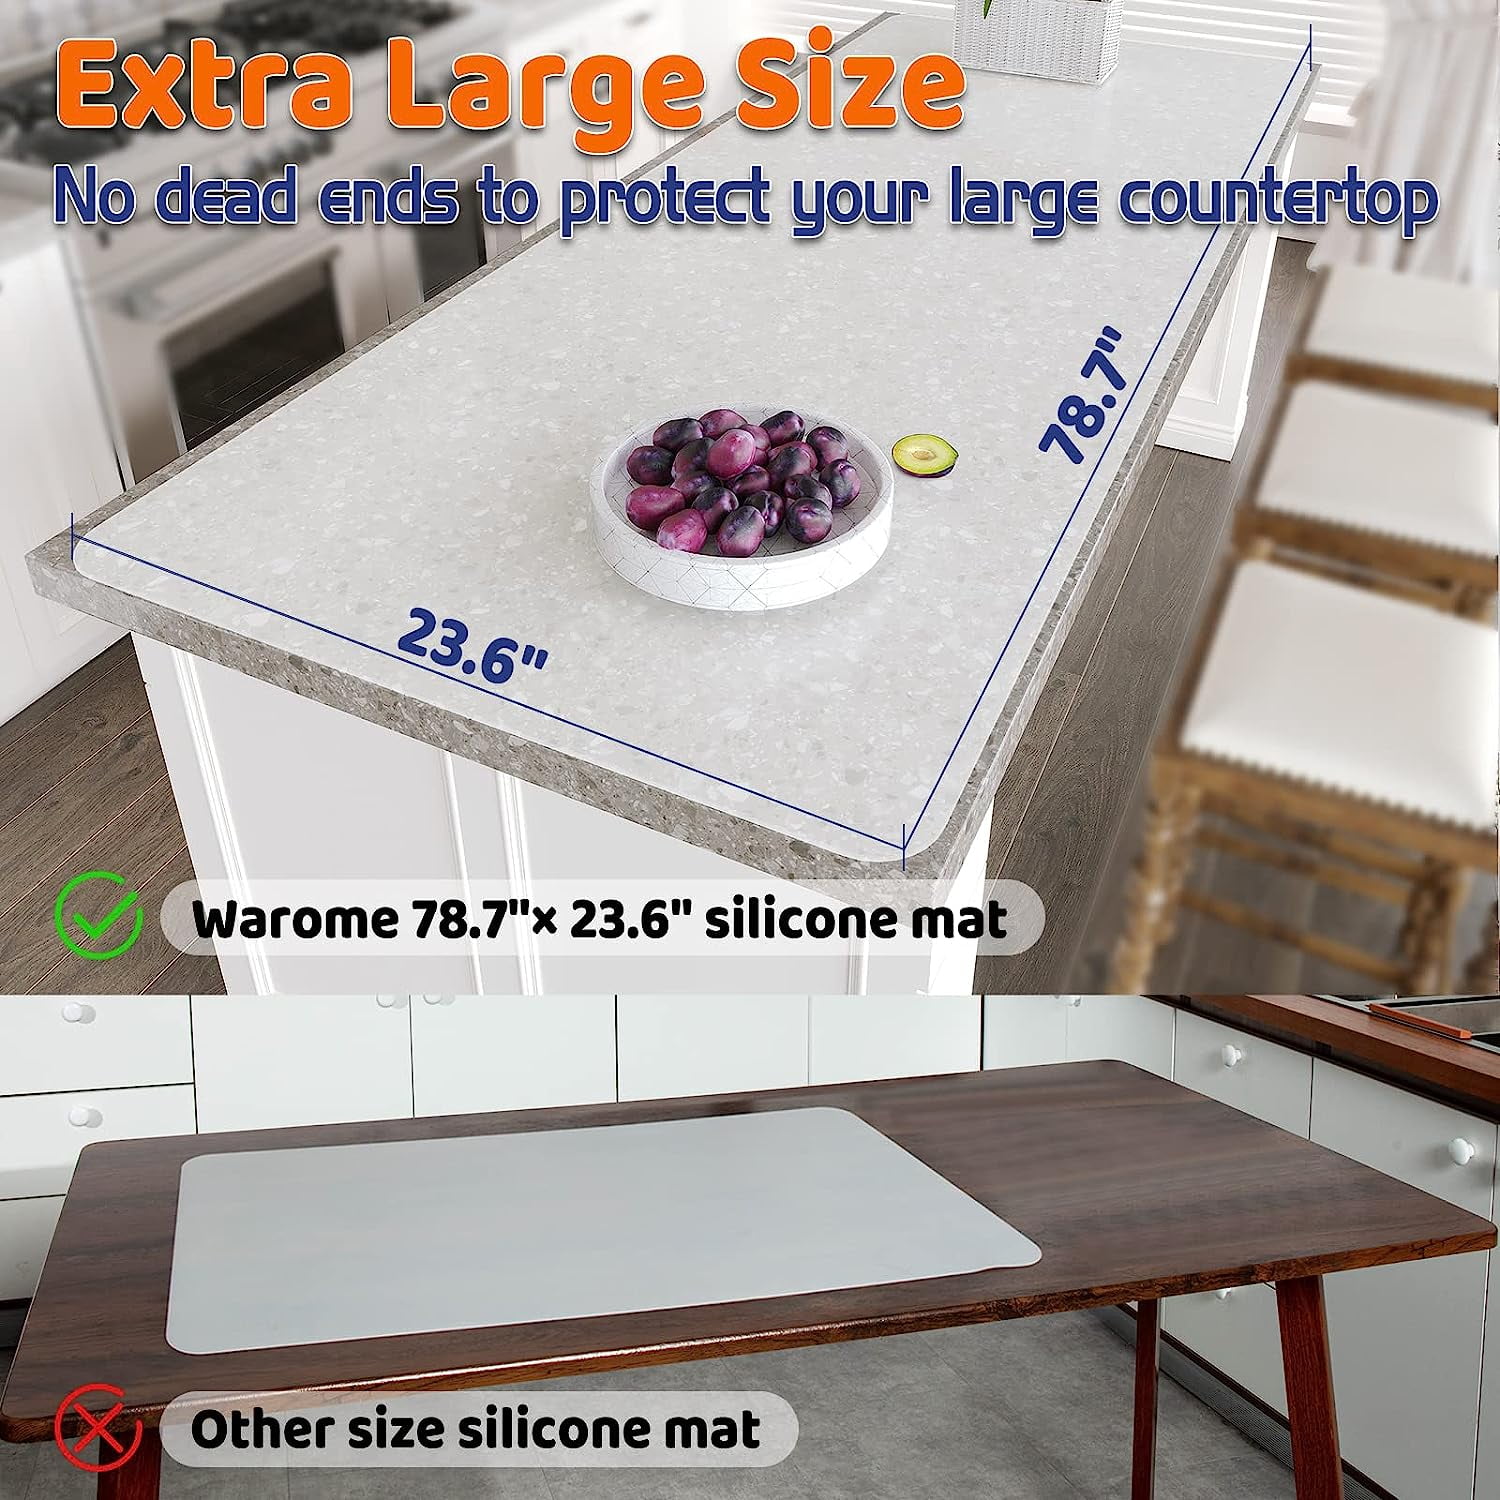 OYSIR extra large silicone mats for kitchen counter 47x23.6